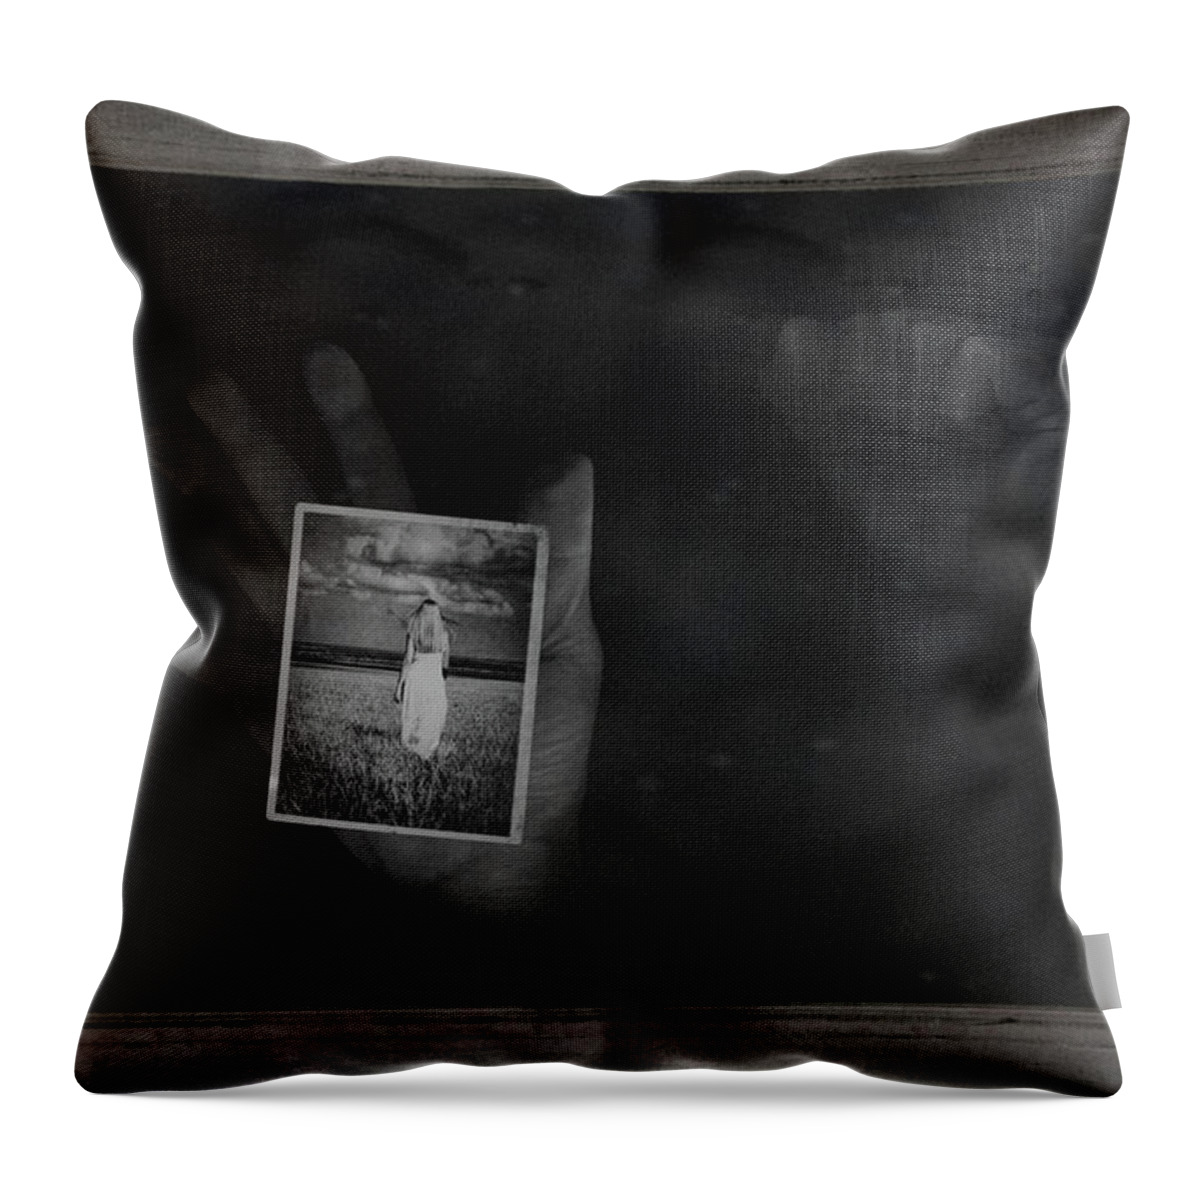 Hand Throw Pillow featuring the photograph Why Did You Leave Me by Tom Mc Nemar